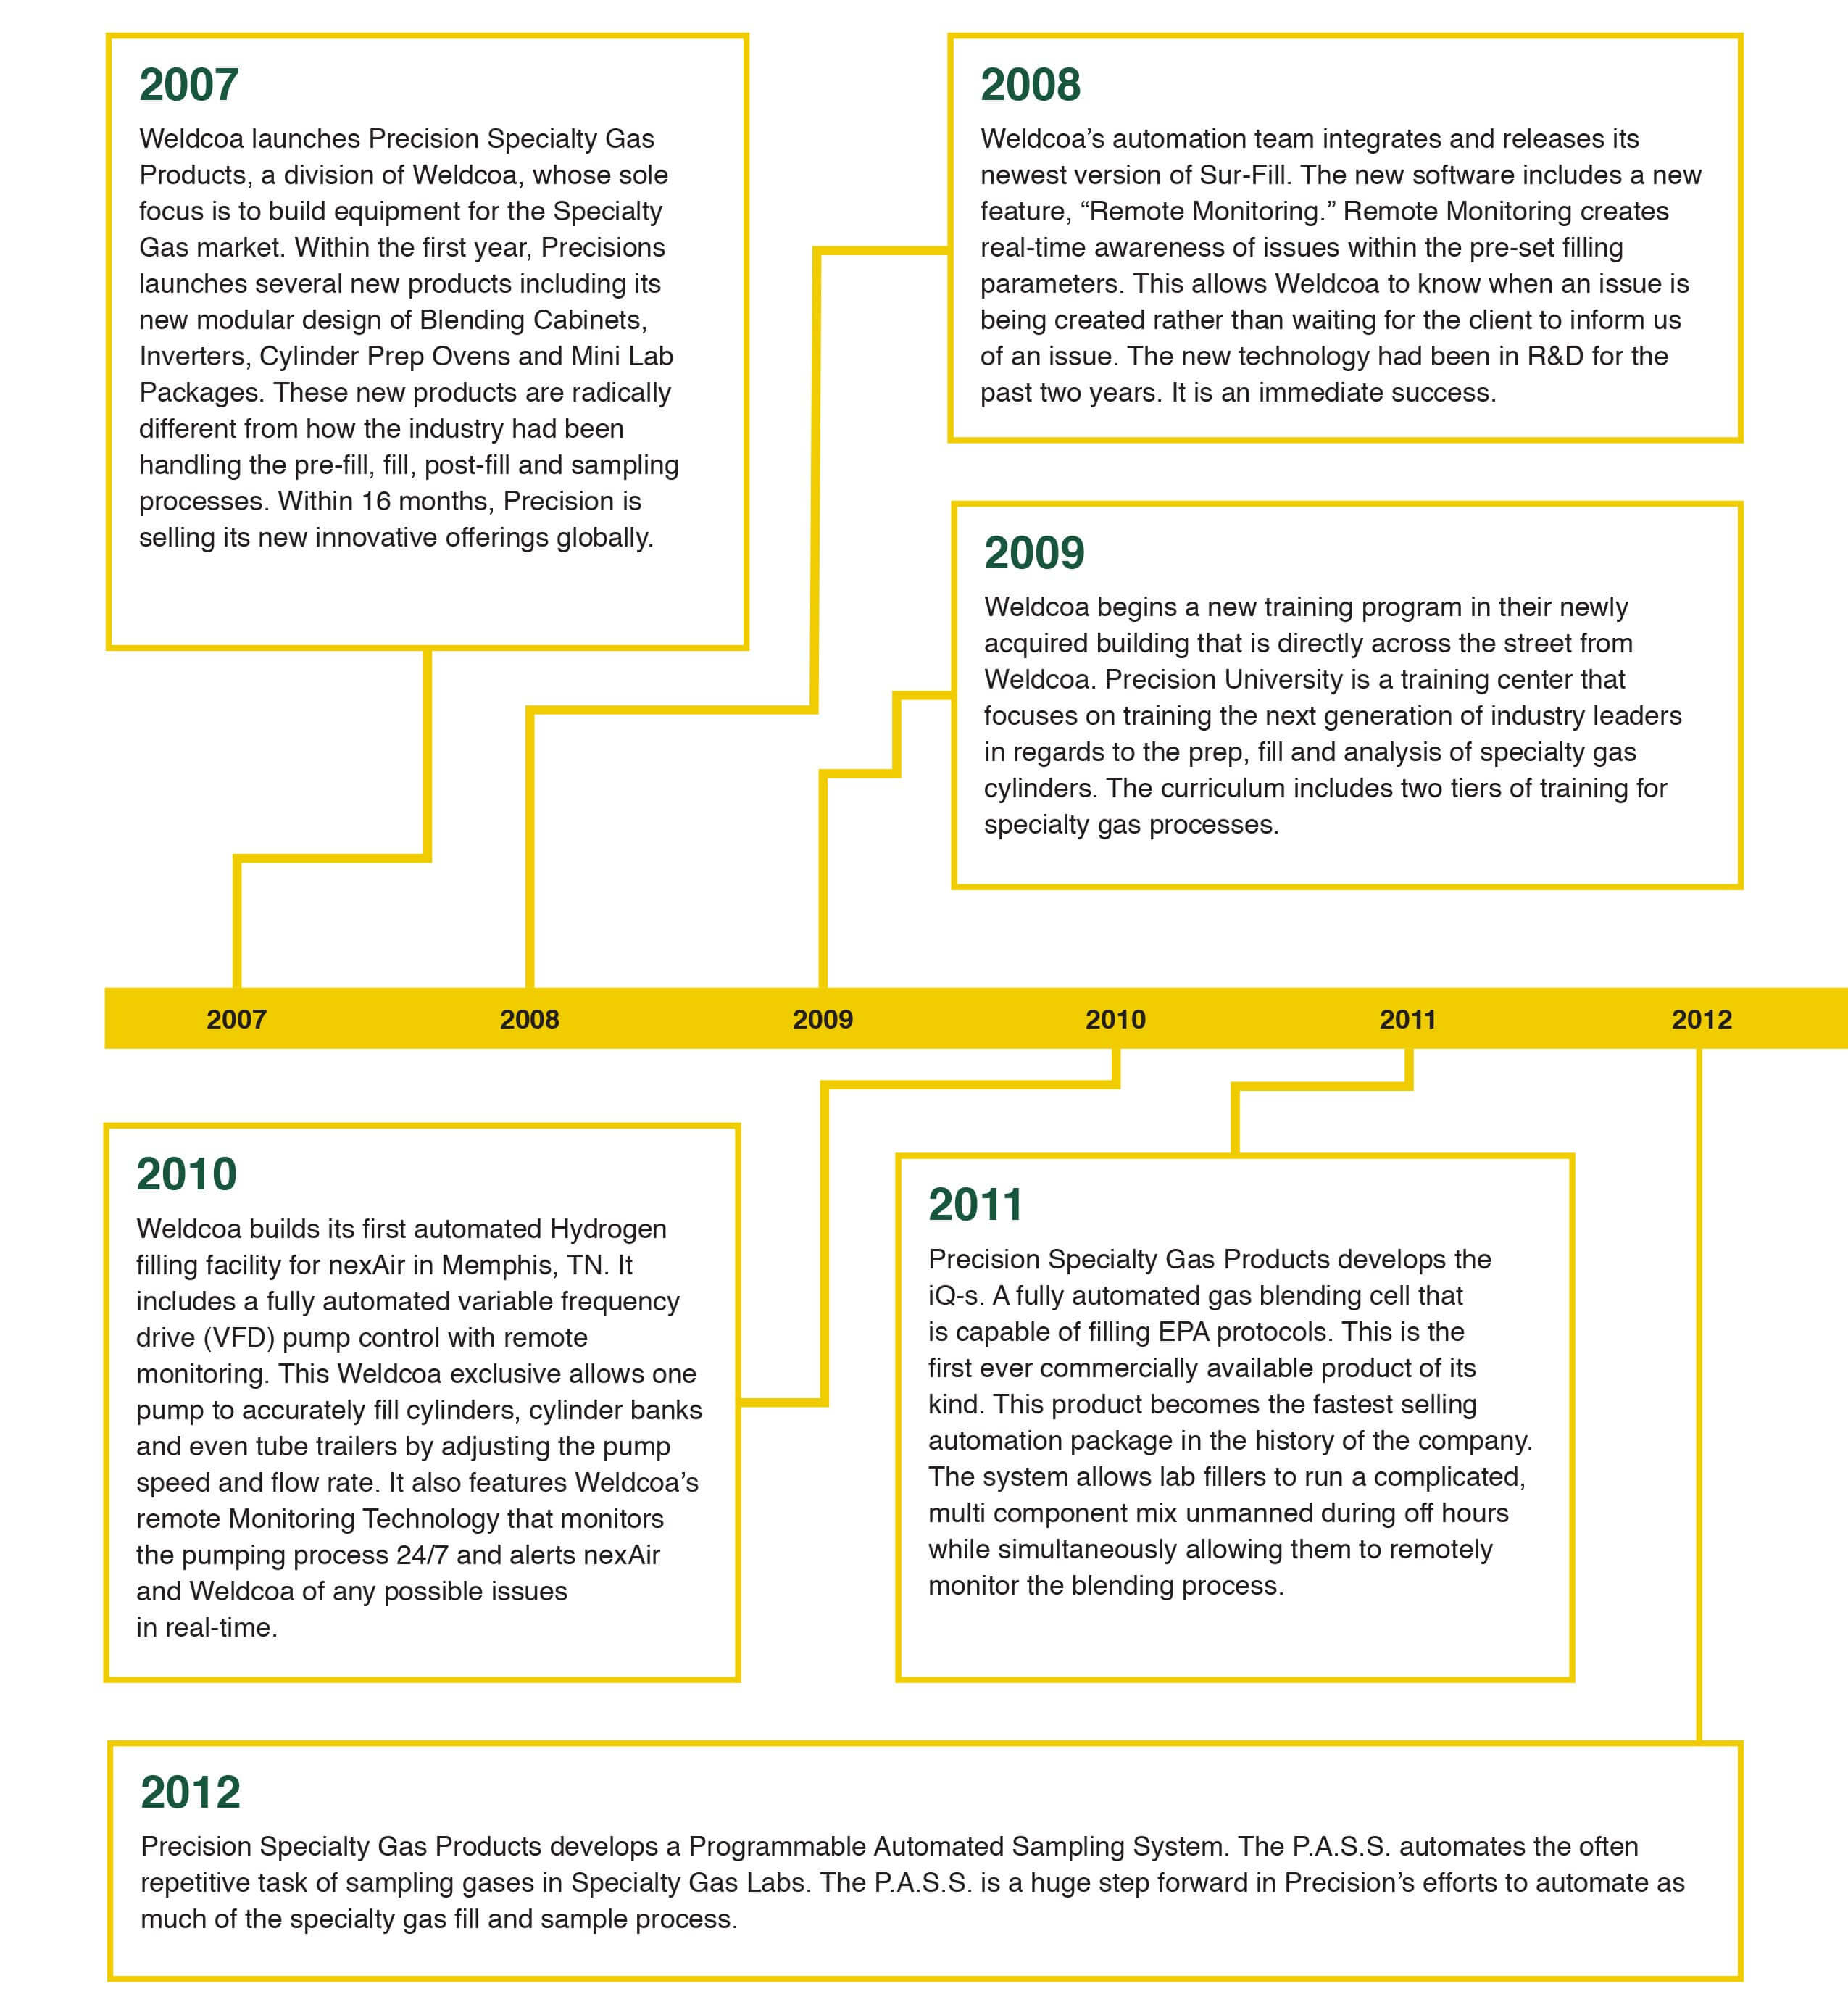 History of Firsts 2007-2012